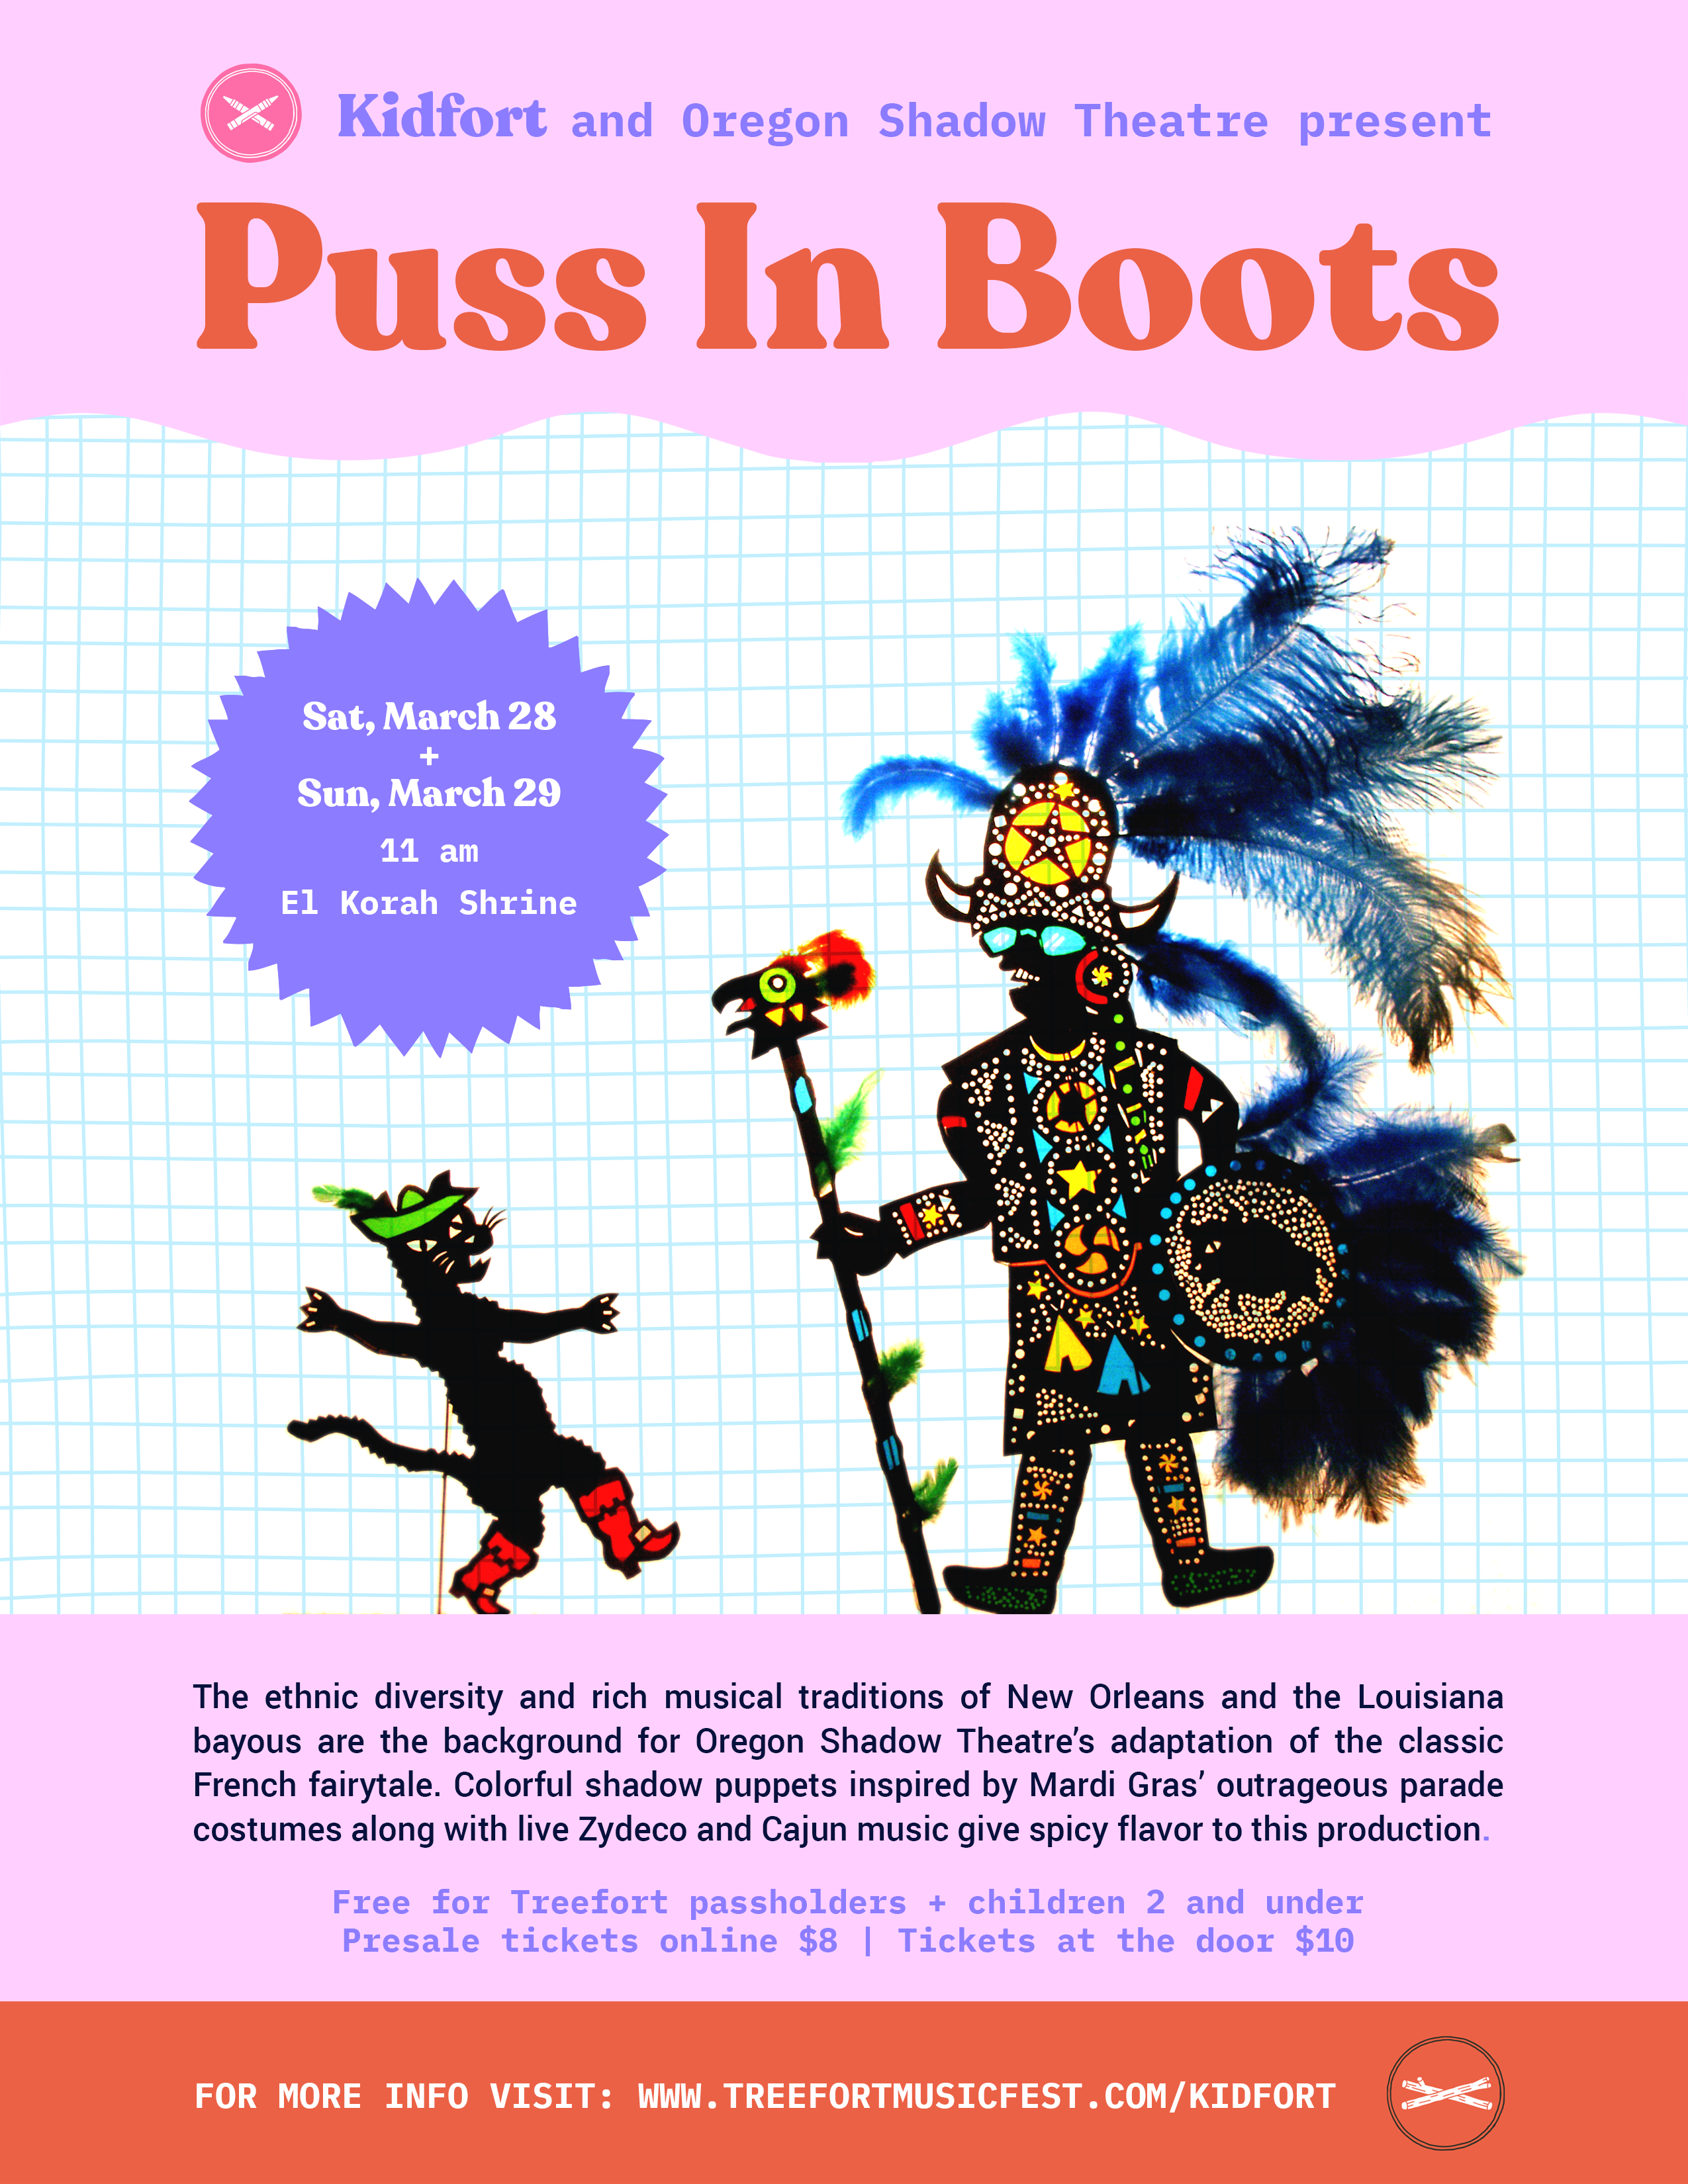 KIDFORT & Oregon Shadow Theater present PUSS IN BOOTS 